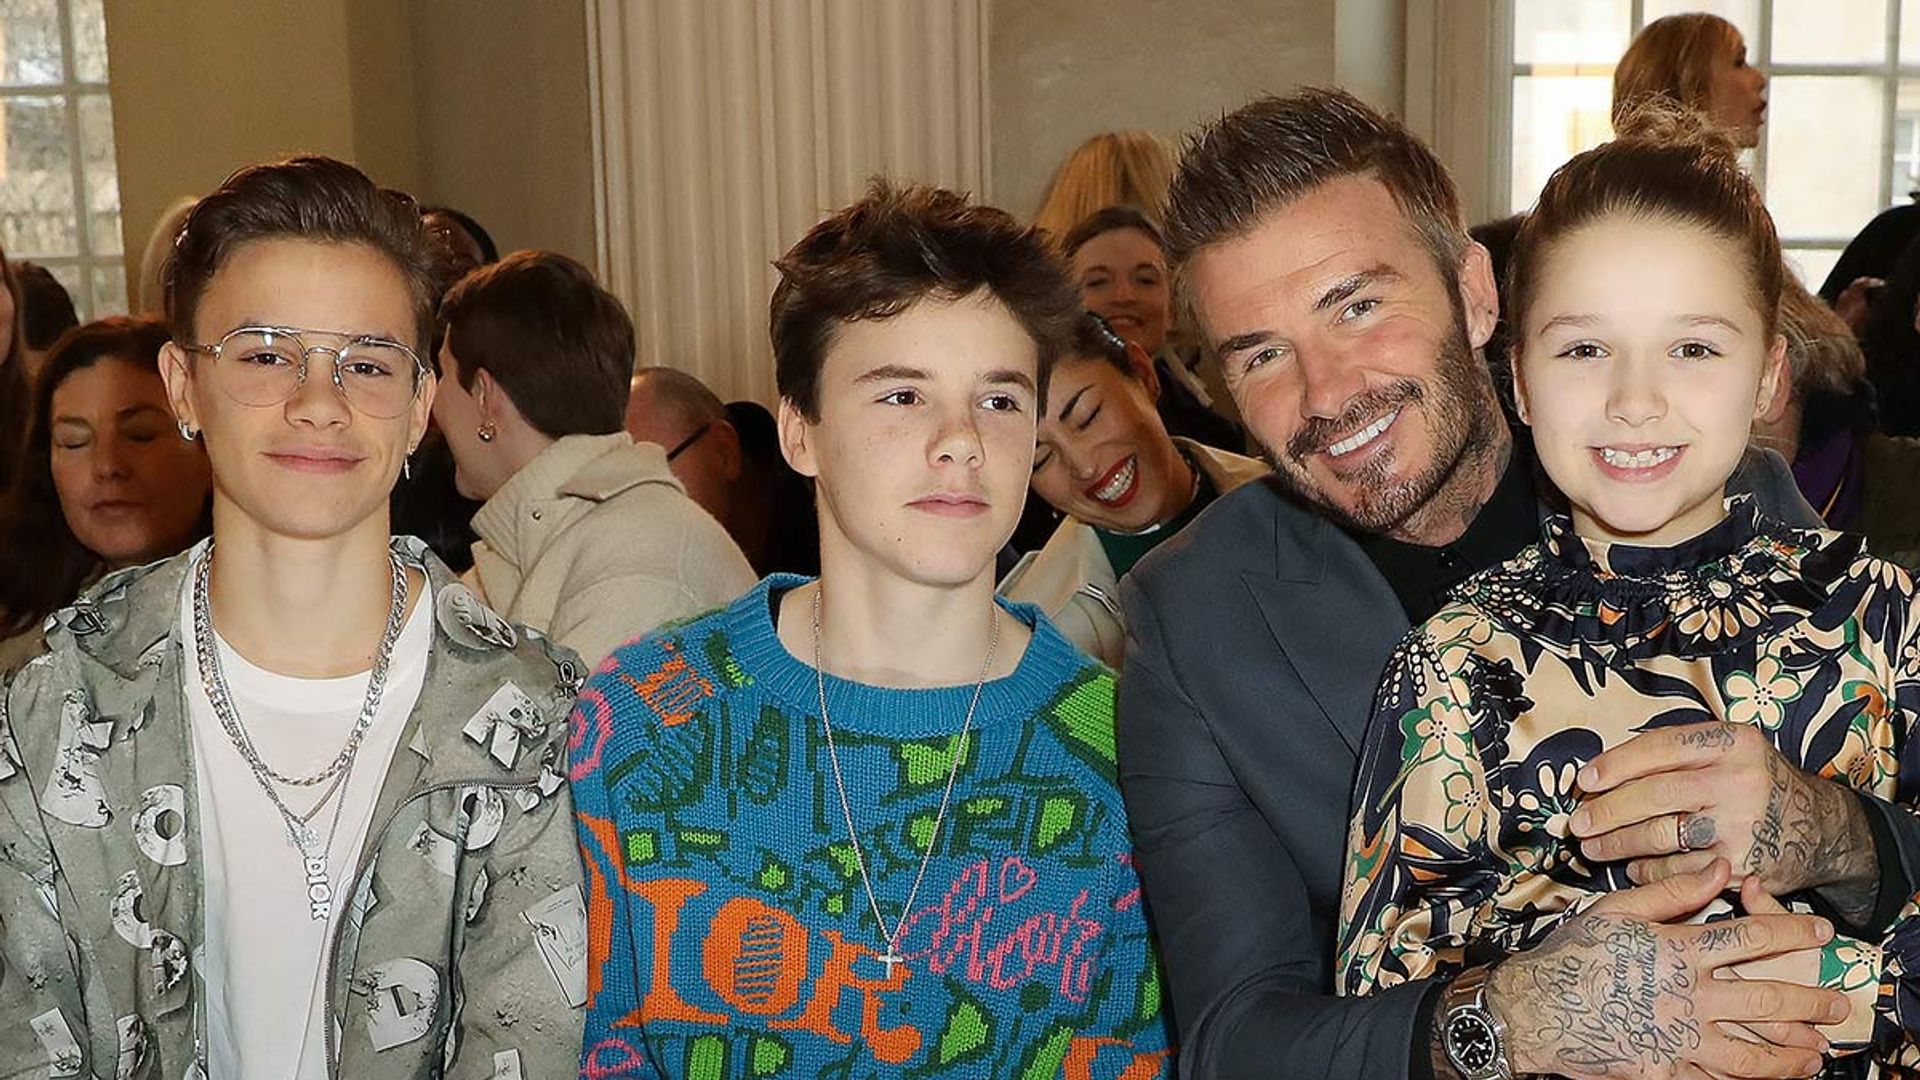 beckham fans saying same thing about family photo